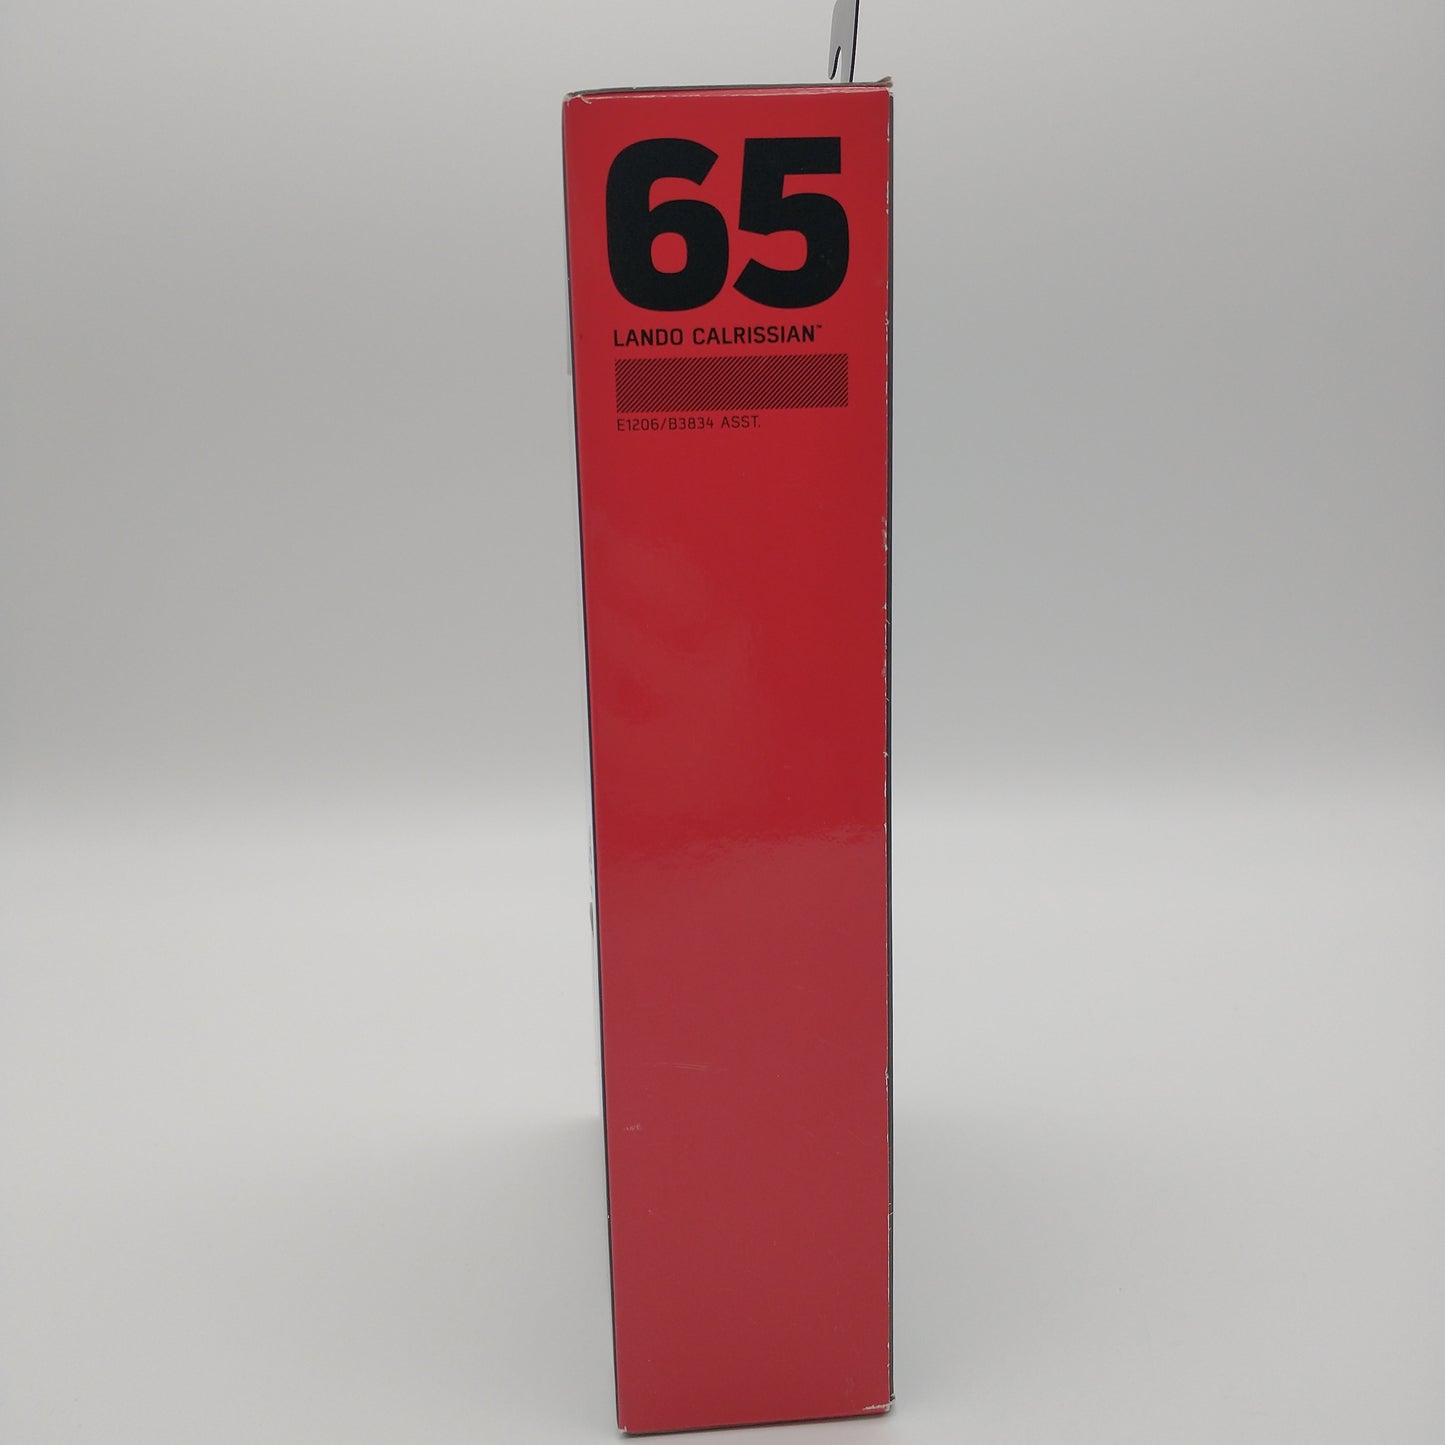 The side of the box is red with the number 65 printed on the top in bold black lettering.